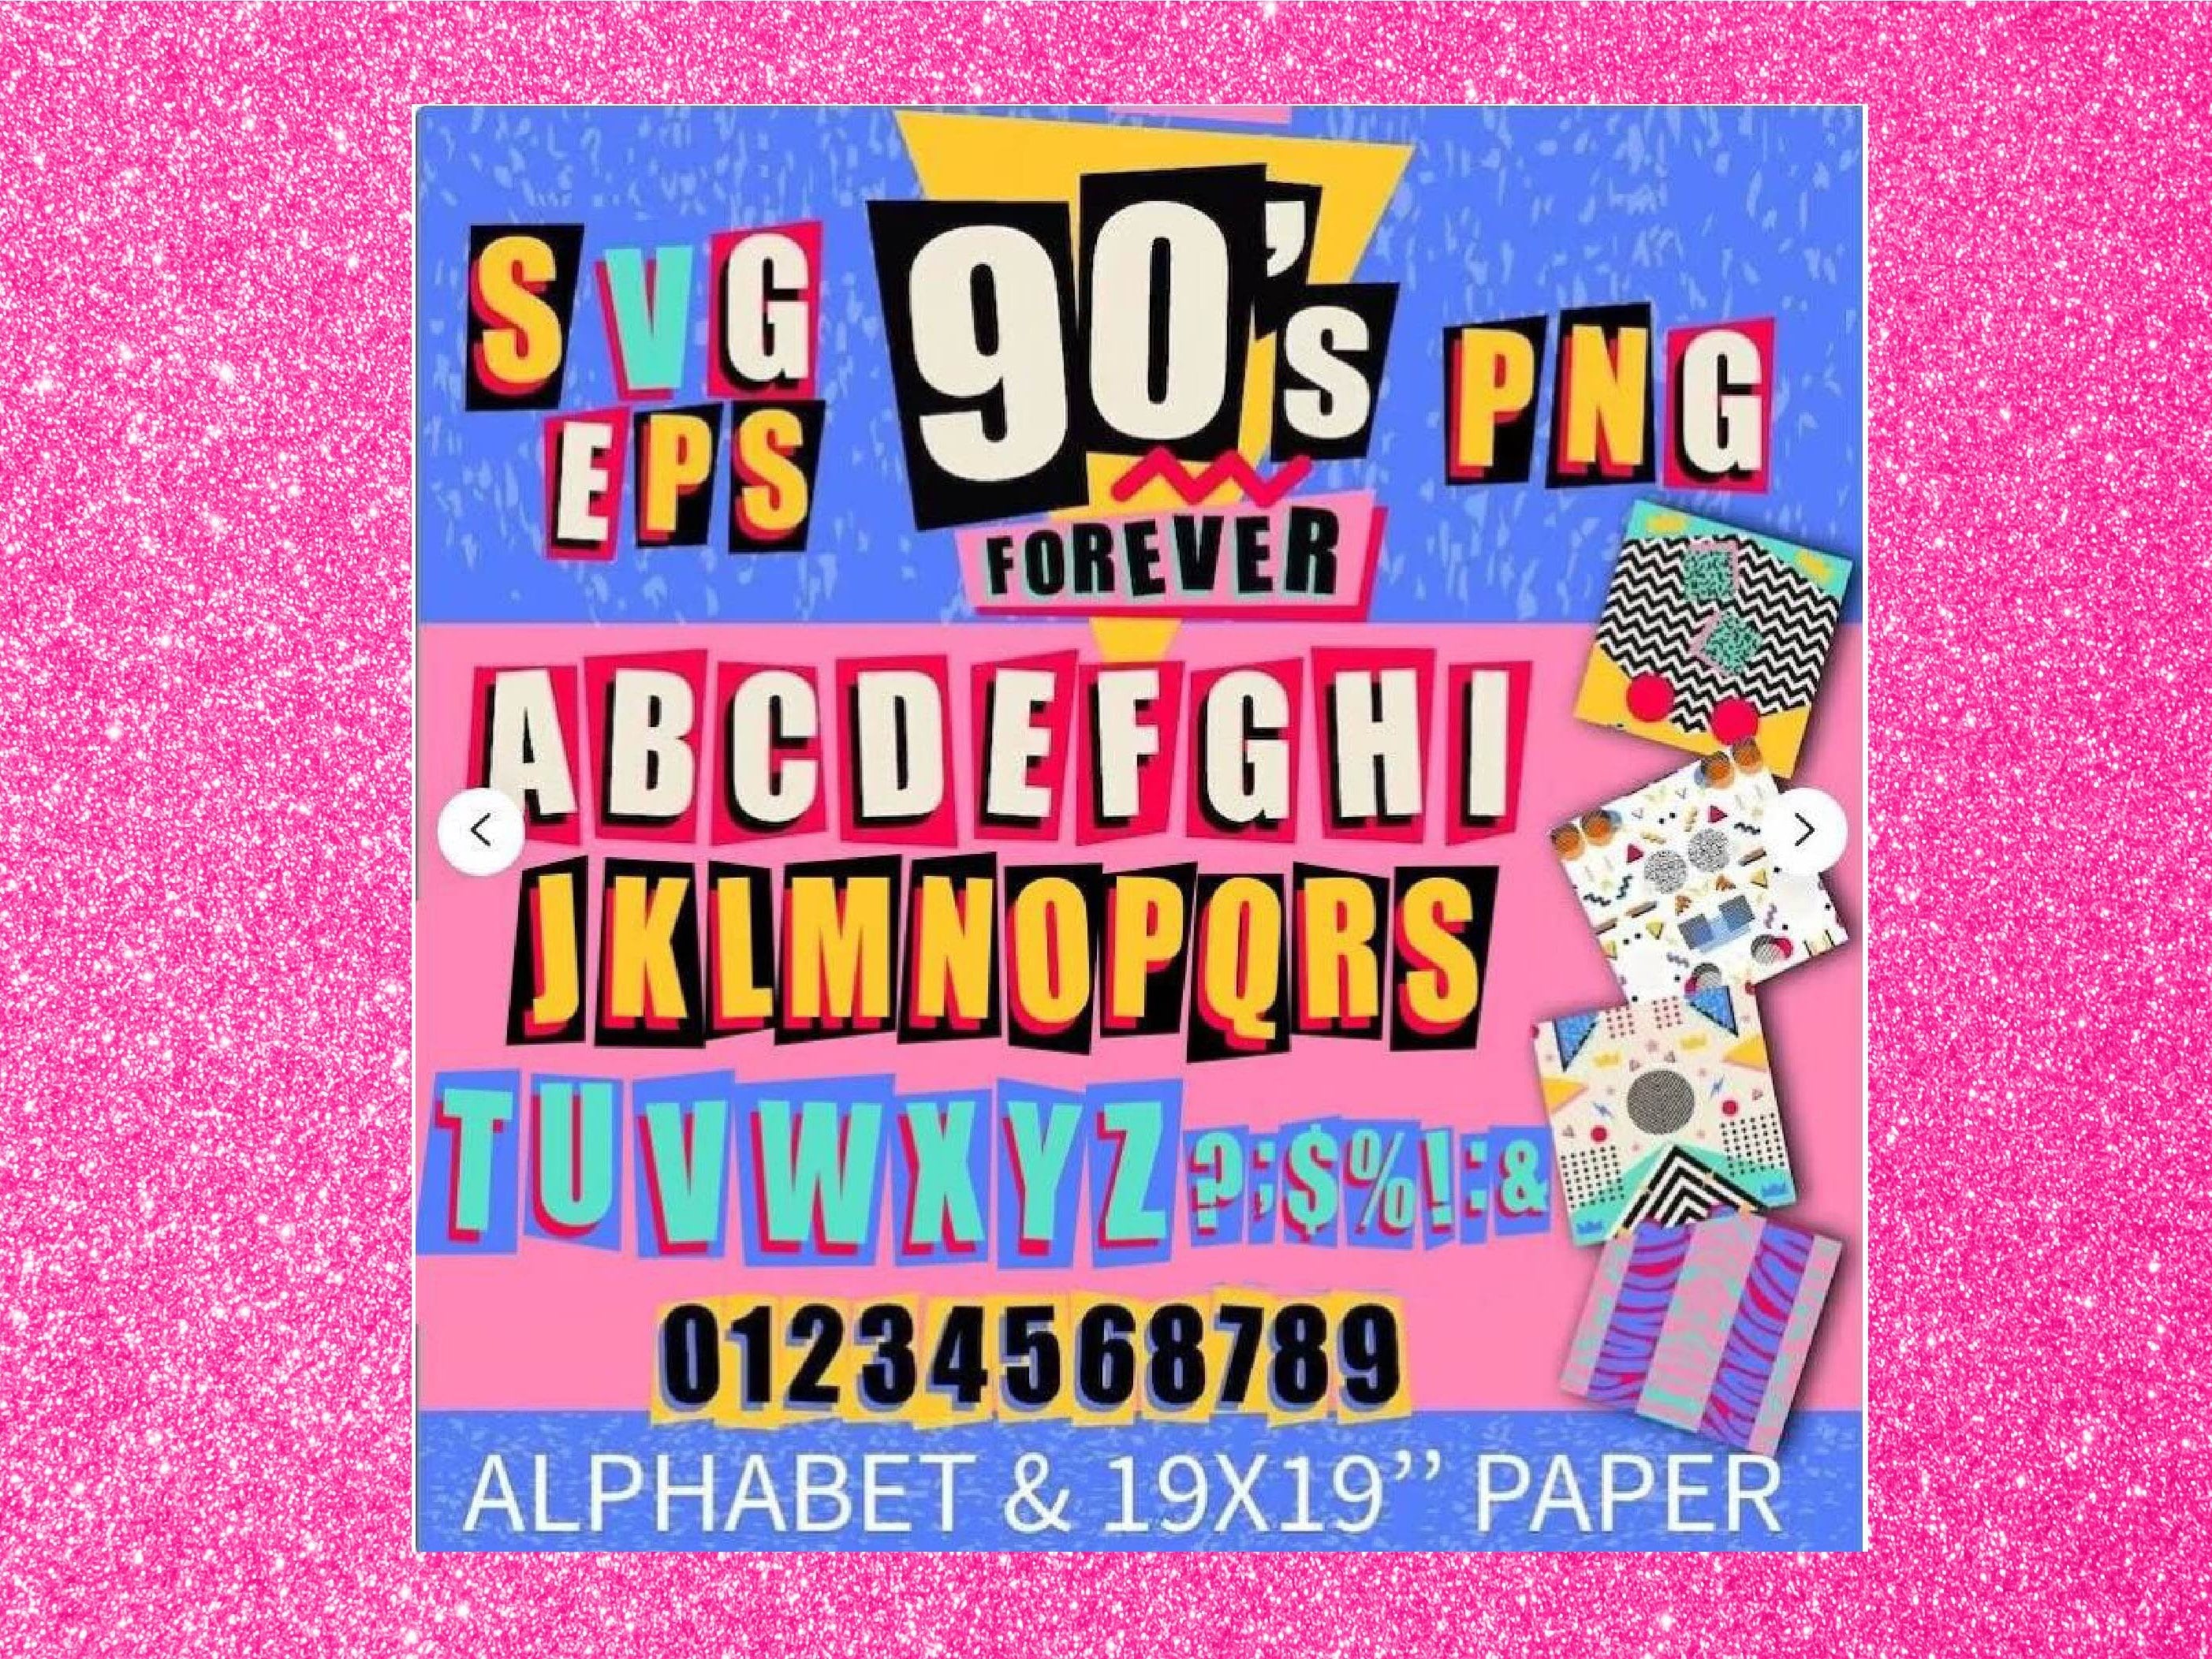 90's Clipart 90s Retro 90s Sticker Pack 90s SVG, PNG and JPG Bundle 90s  Vibe Take Me Back to 90s 